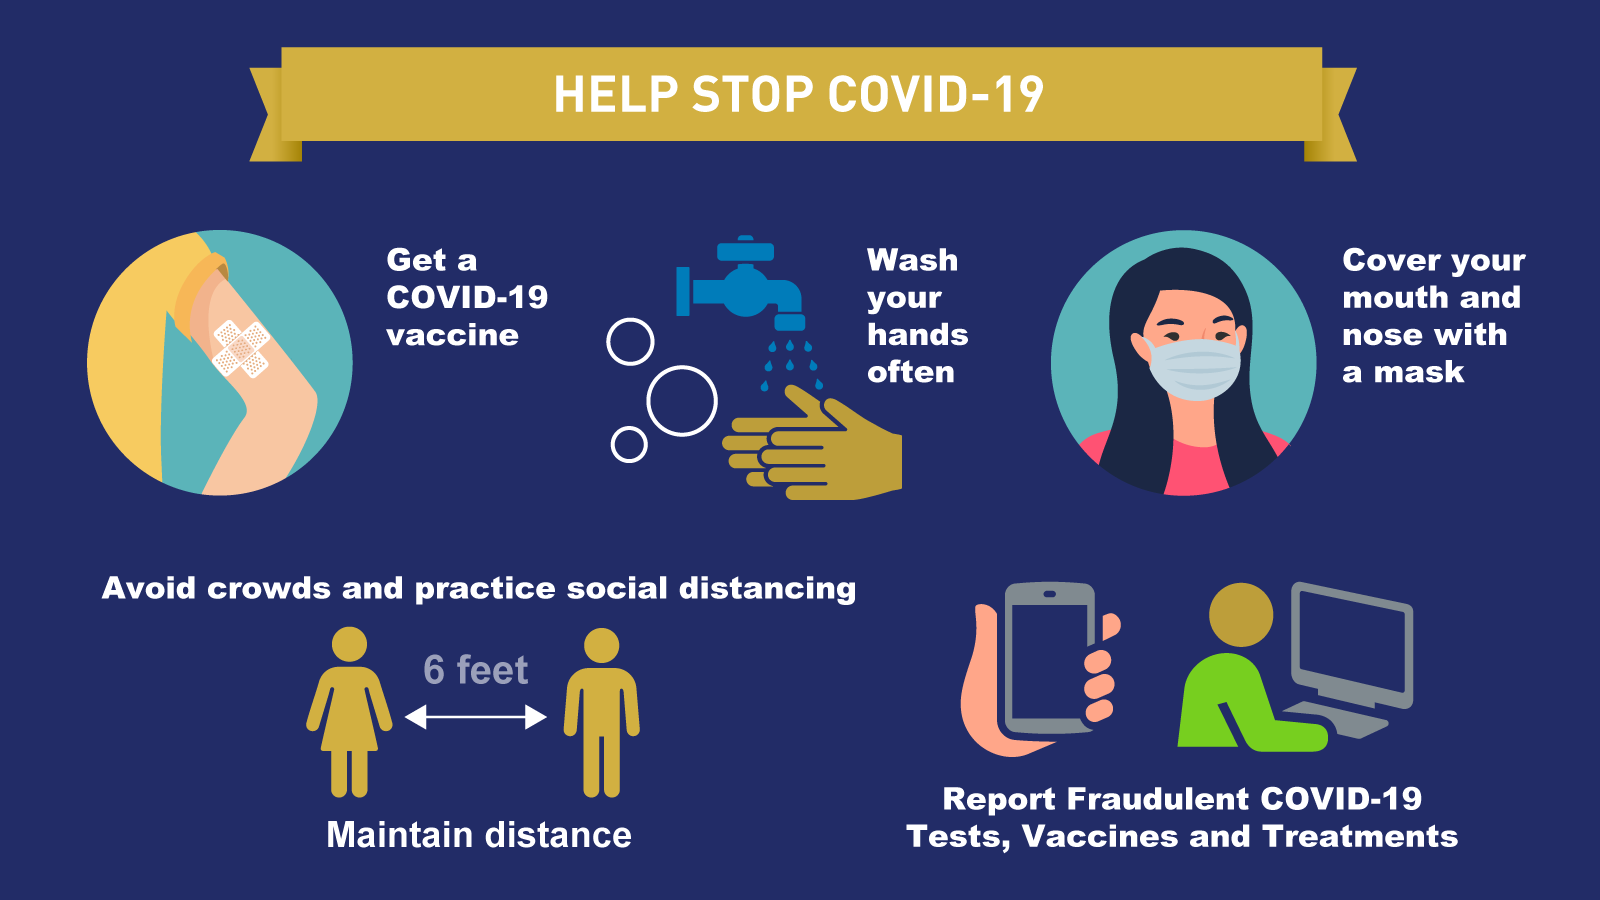 COVID-19 Prevention and Safety